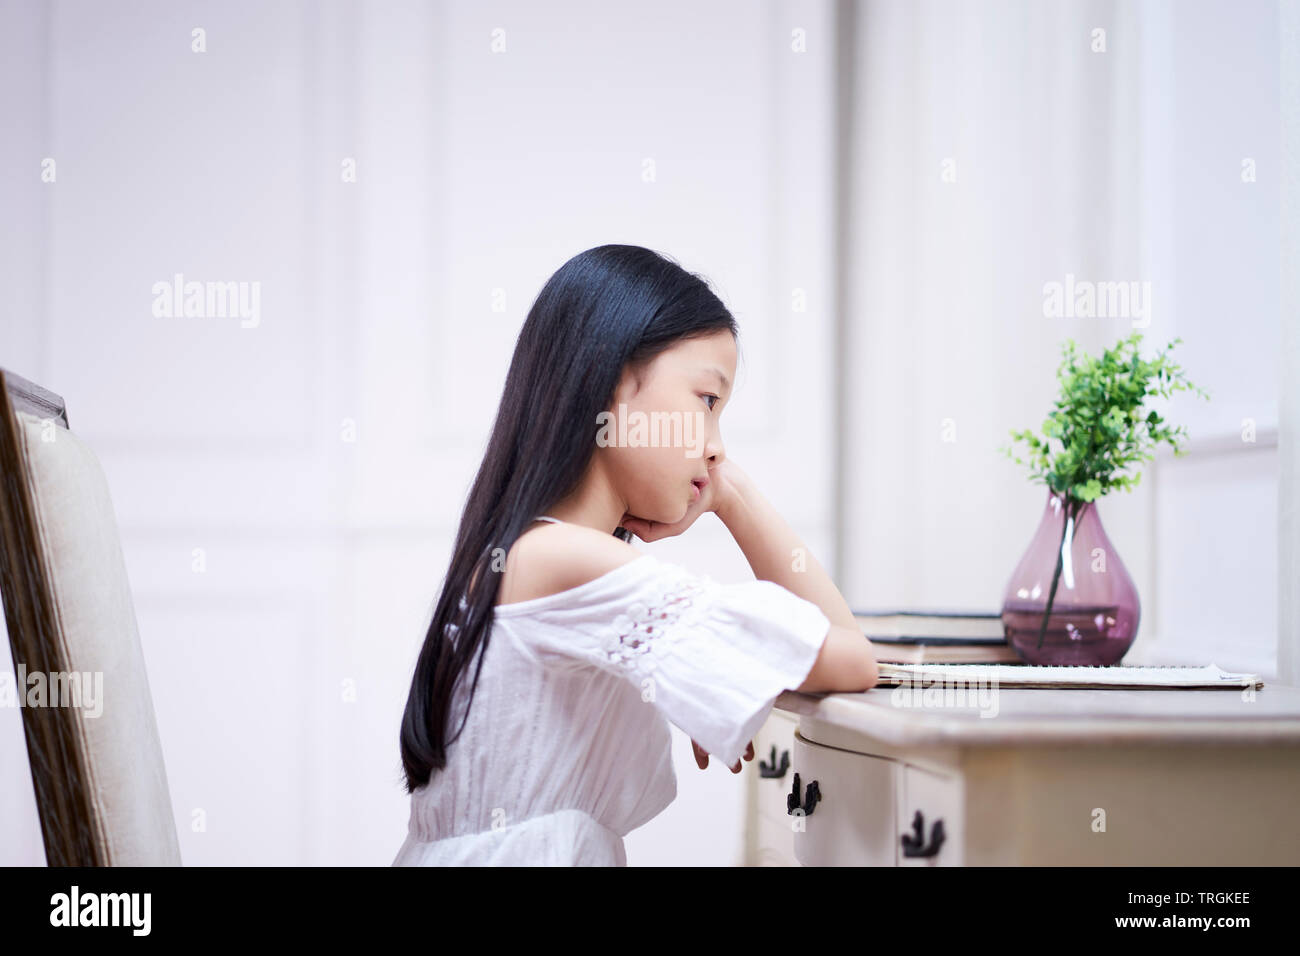 sad little asian girl with long black hair sitting at desk in her room thinking with hand on chin Stock Photo